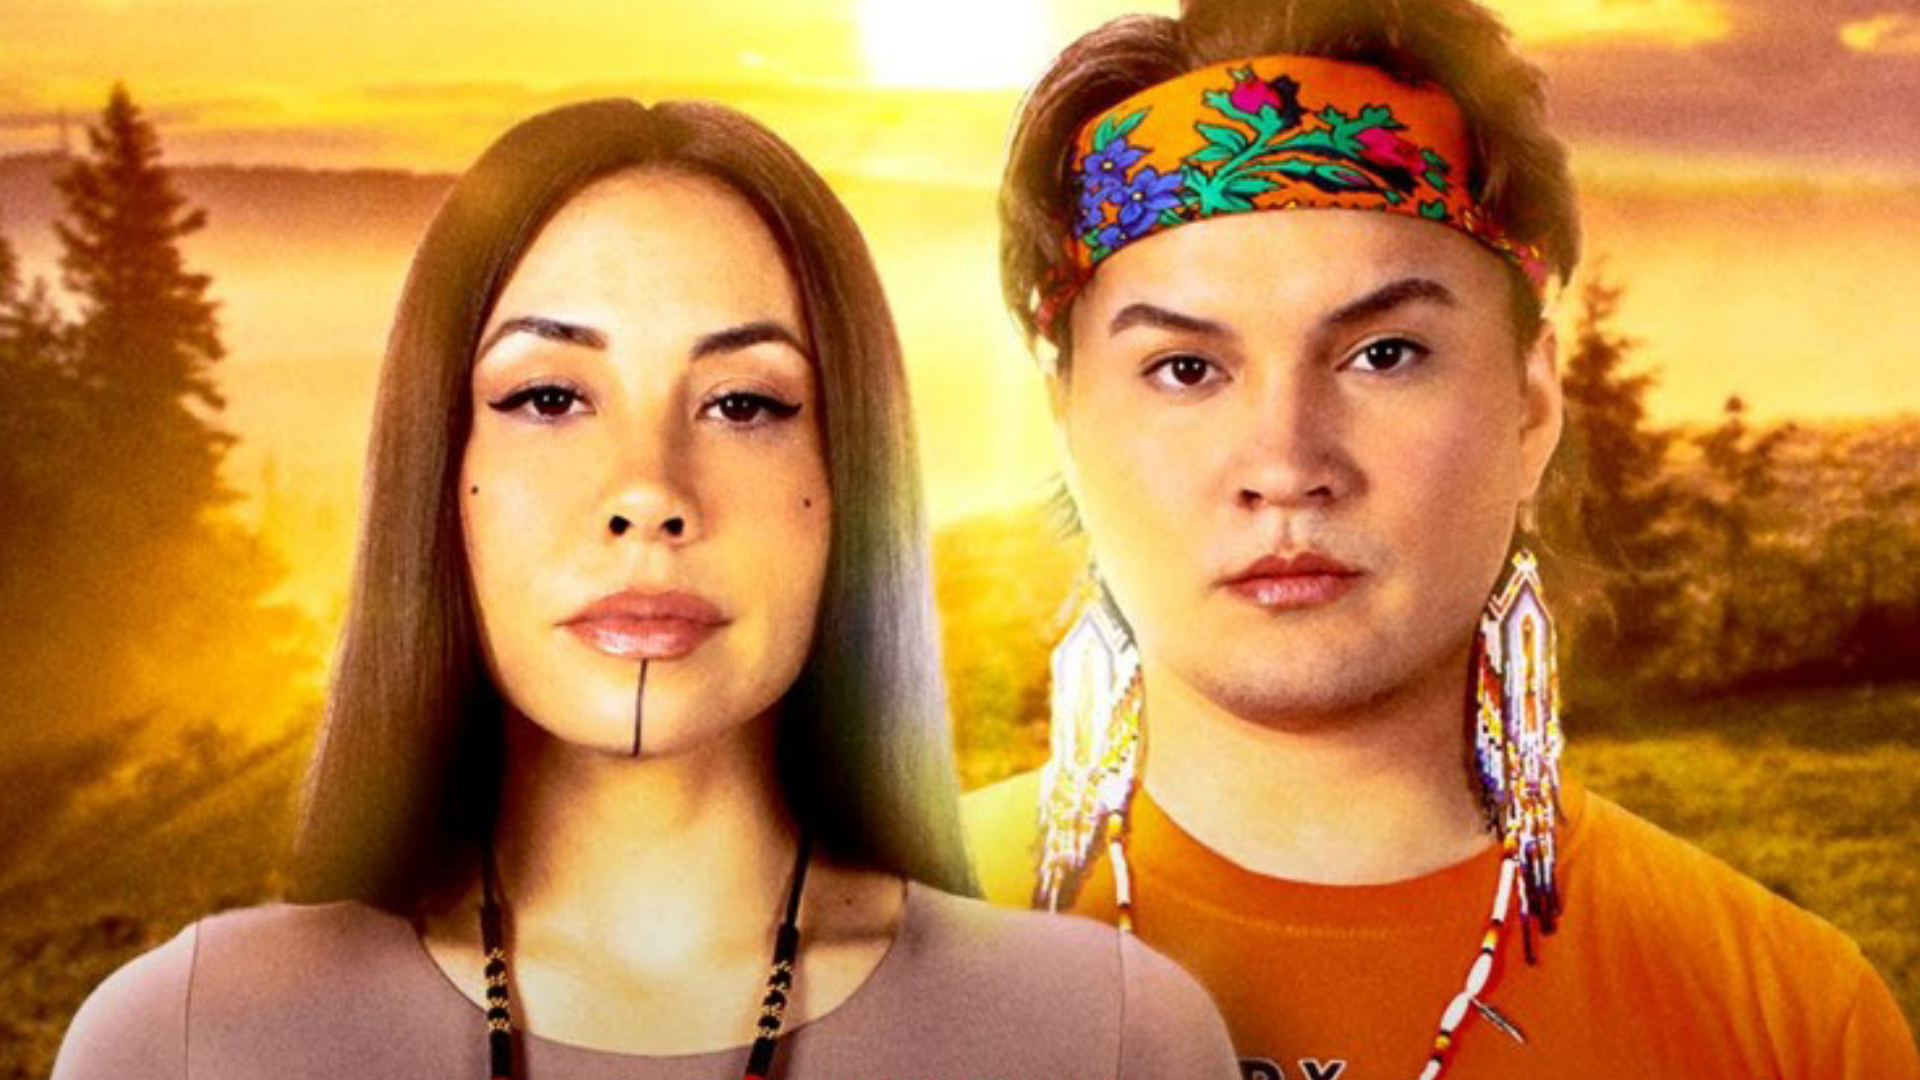 Docu-series ‘Reclaim(ed)’ explores Indigenous culture from a Gen Z perspective